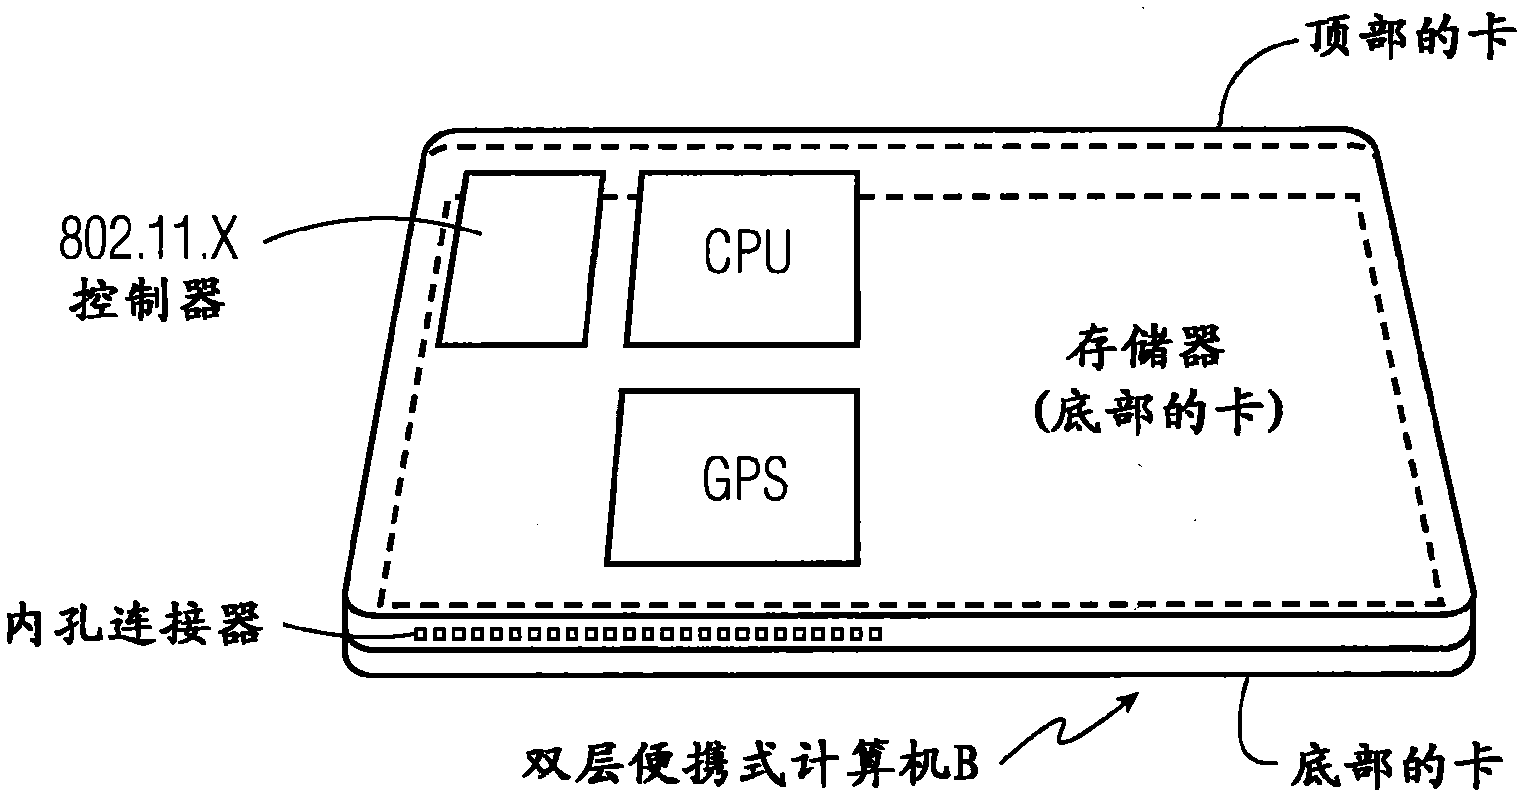 Portable computing system and portable computer for use with same